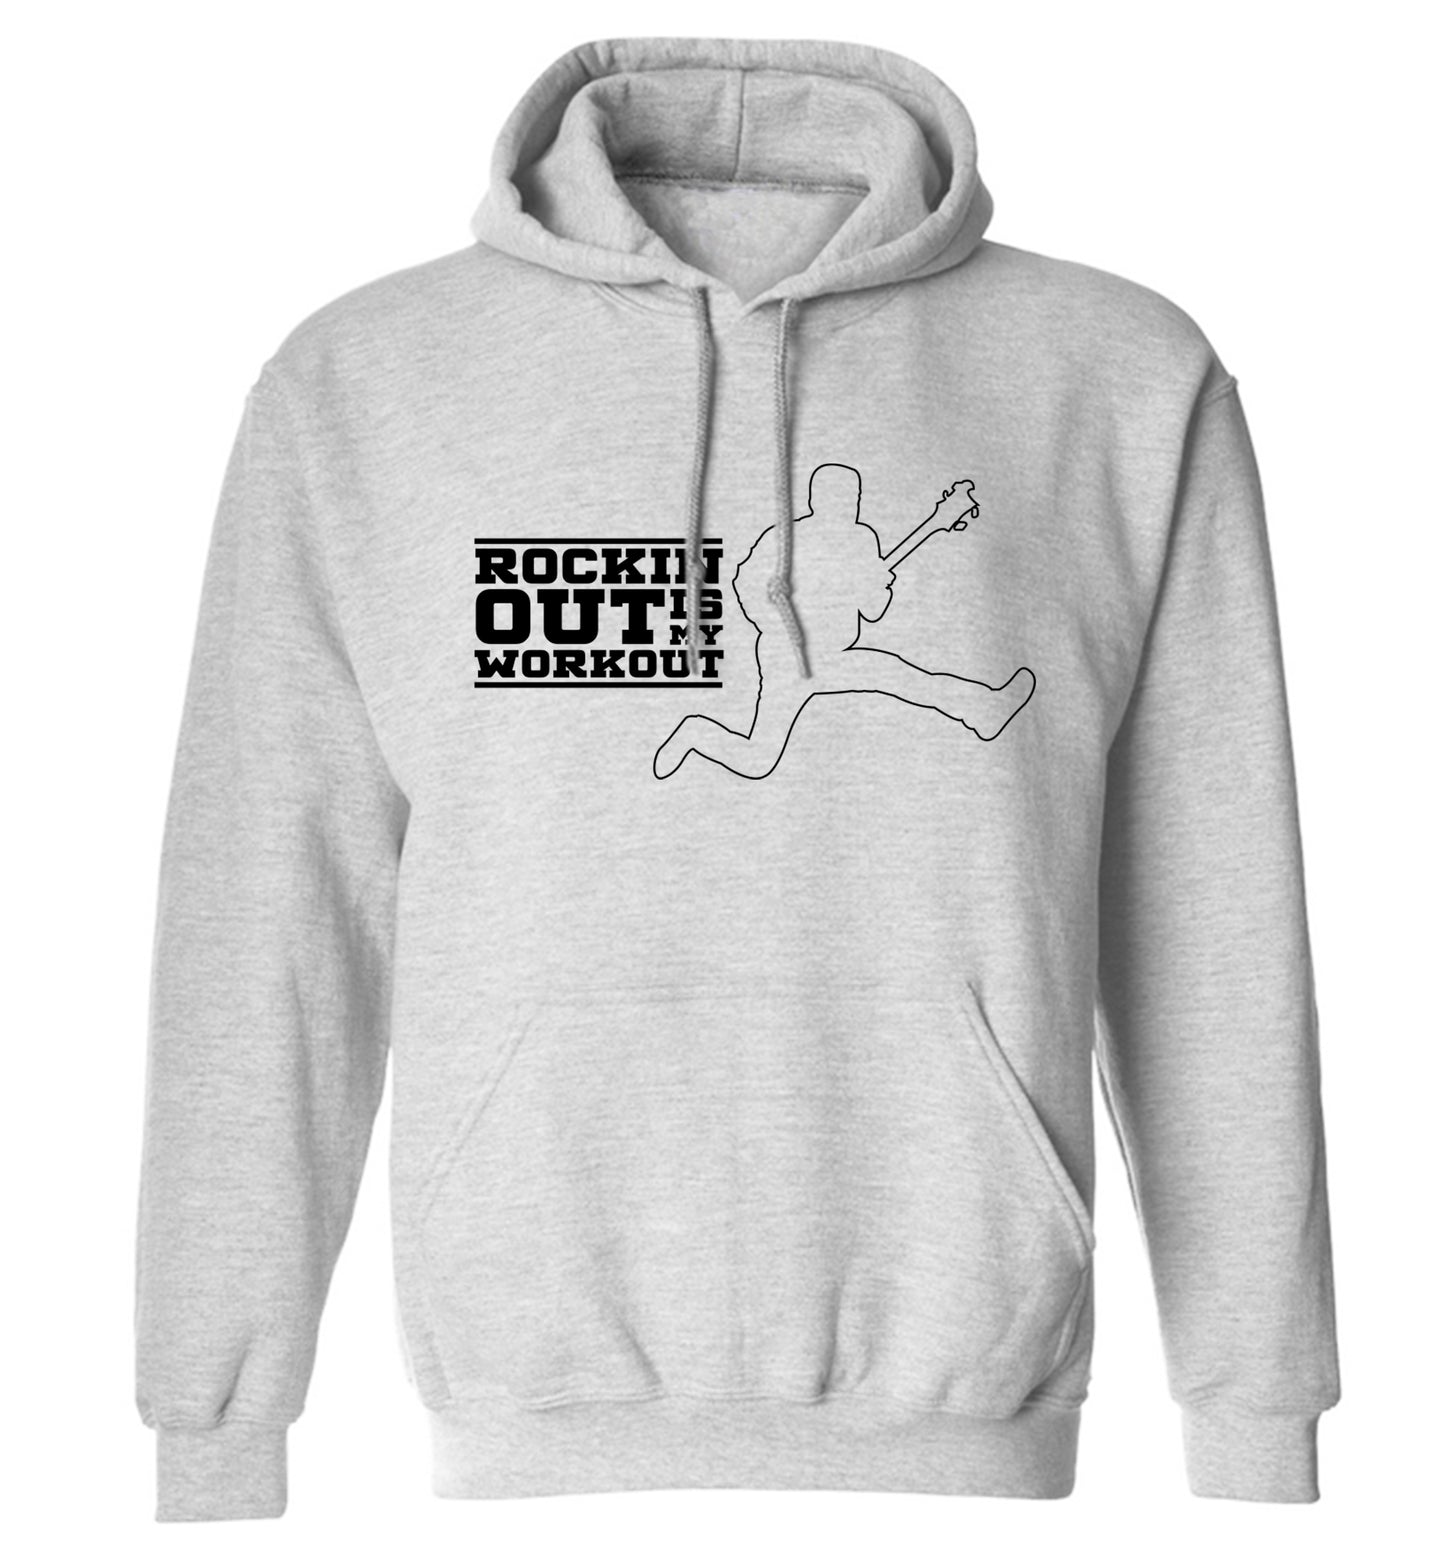 Rockin out is my workout adults unisex grey hoodie 2XL